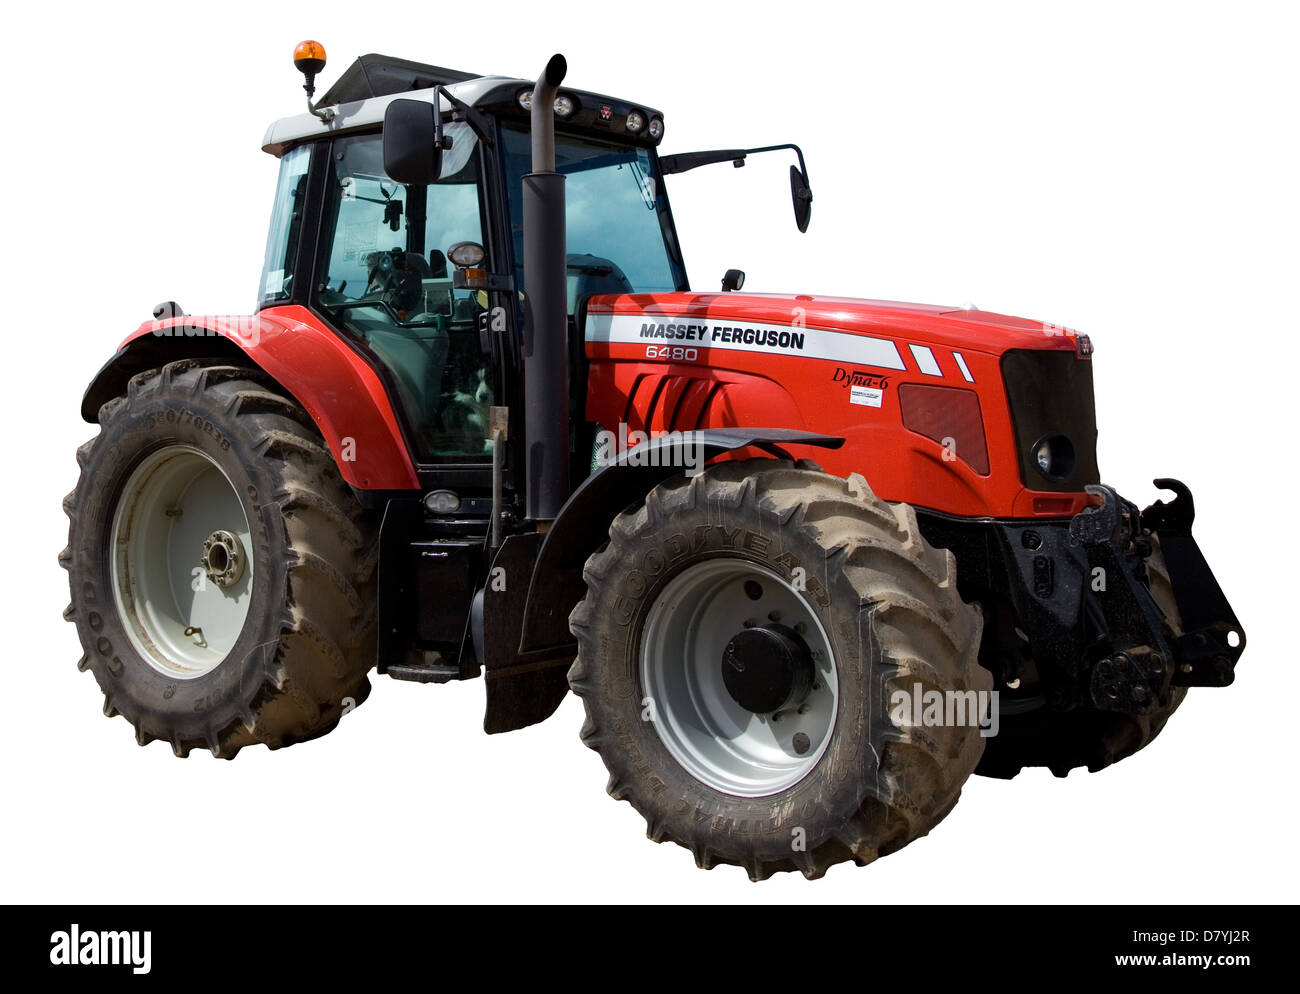 Massey Ferguson 6480 Dyna 6 tractor cut out from it's background,pin sharp high resolution image Stock Photo